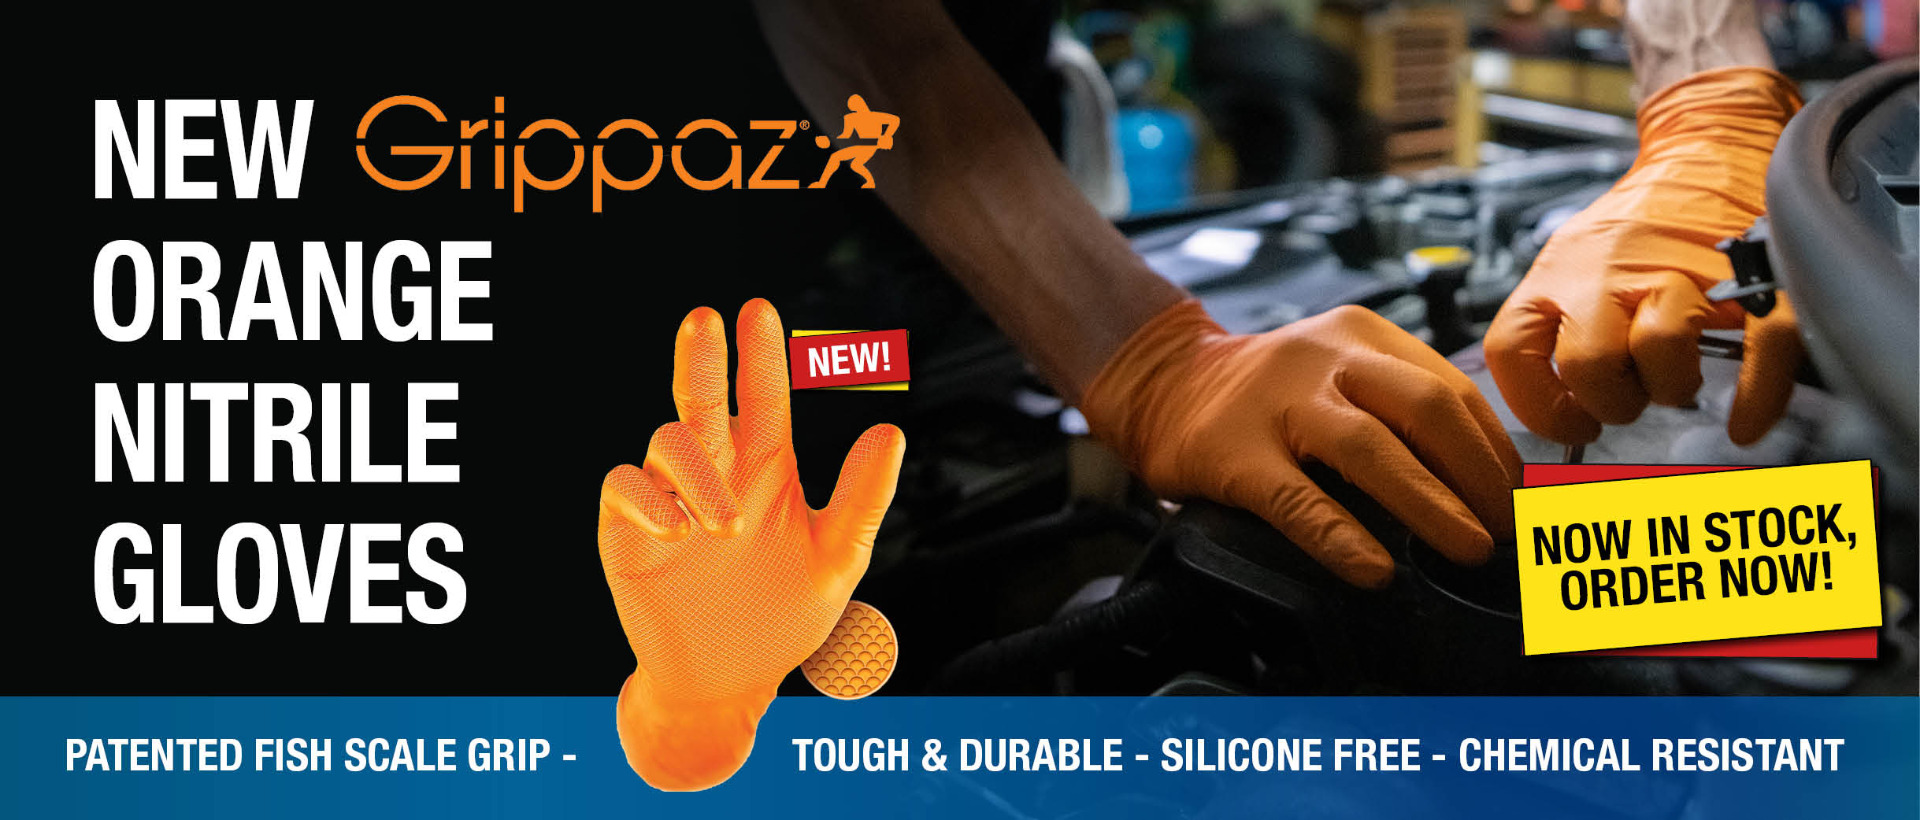 New Grippaz Orange Nitrile Gloves: Patented fish scale grip. Tough and durable. Silicone free. Chemical resistant.